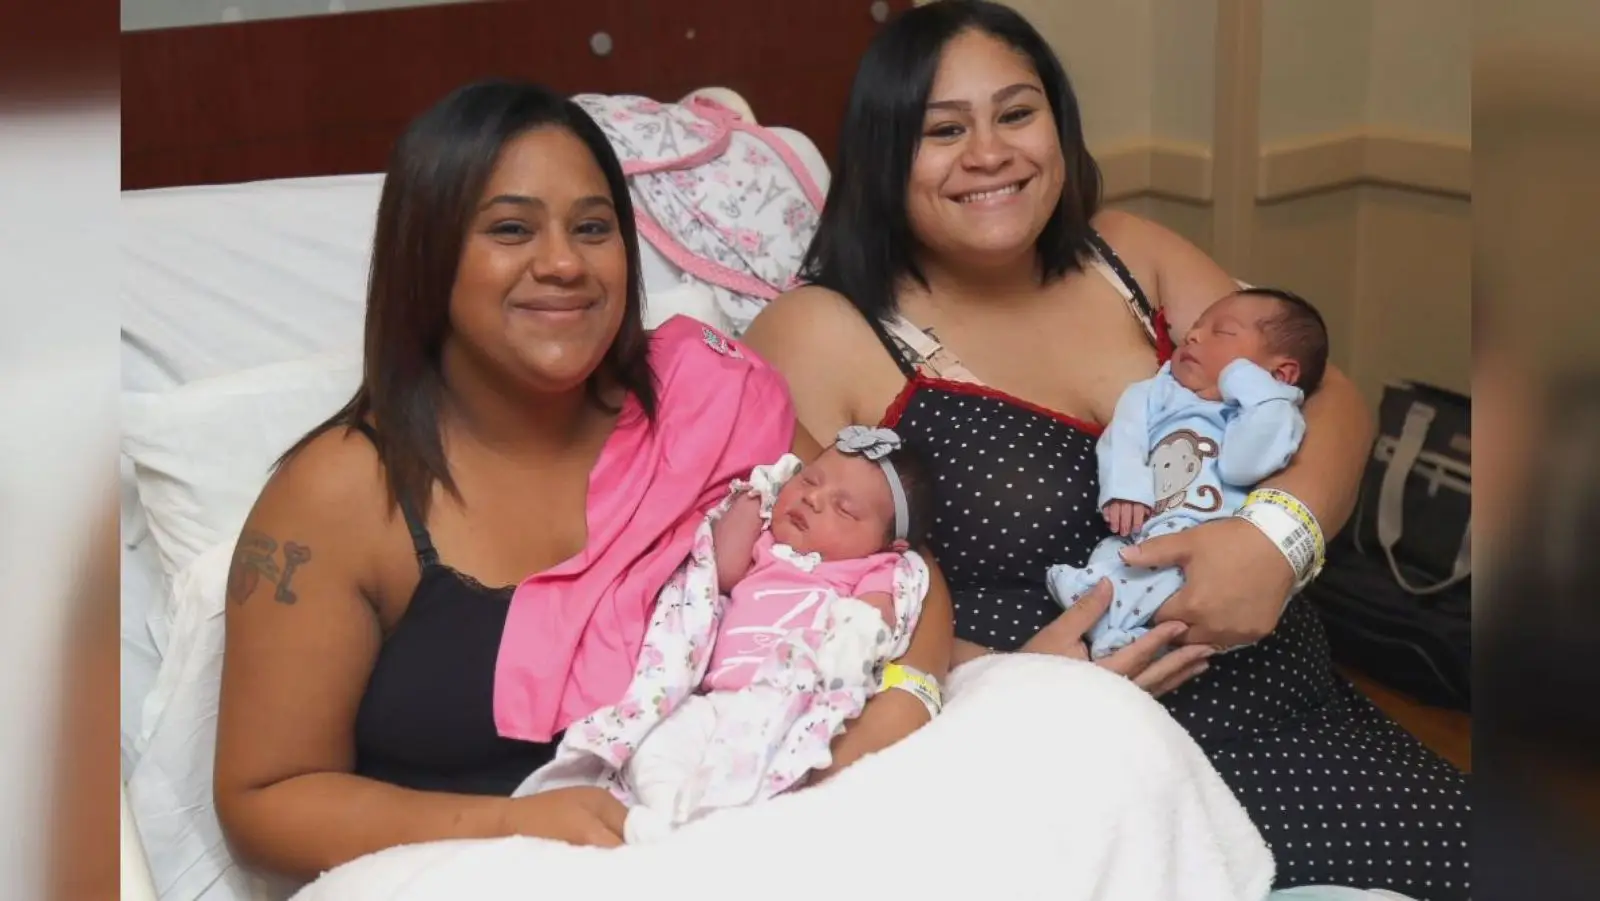 By chance, two sisters from Alabama gave birth at the same time.